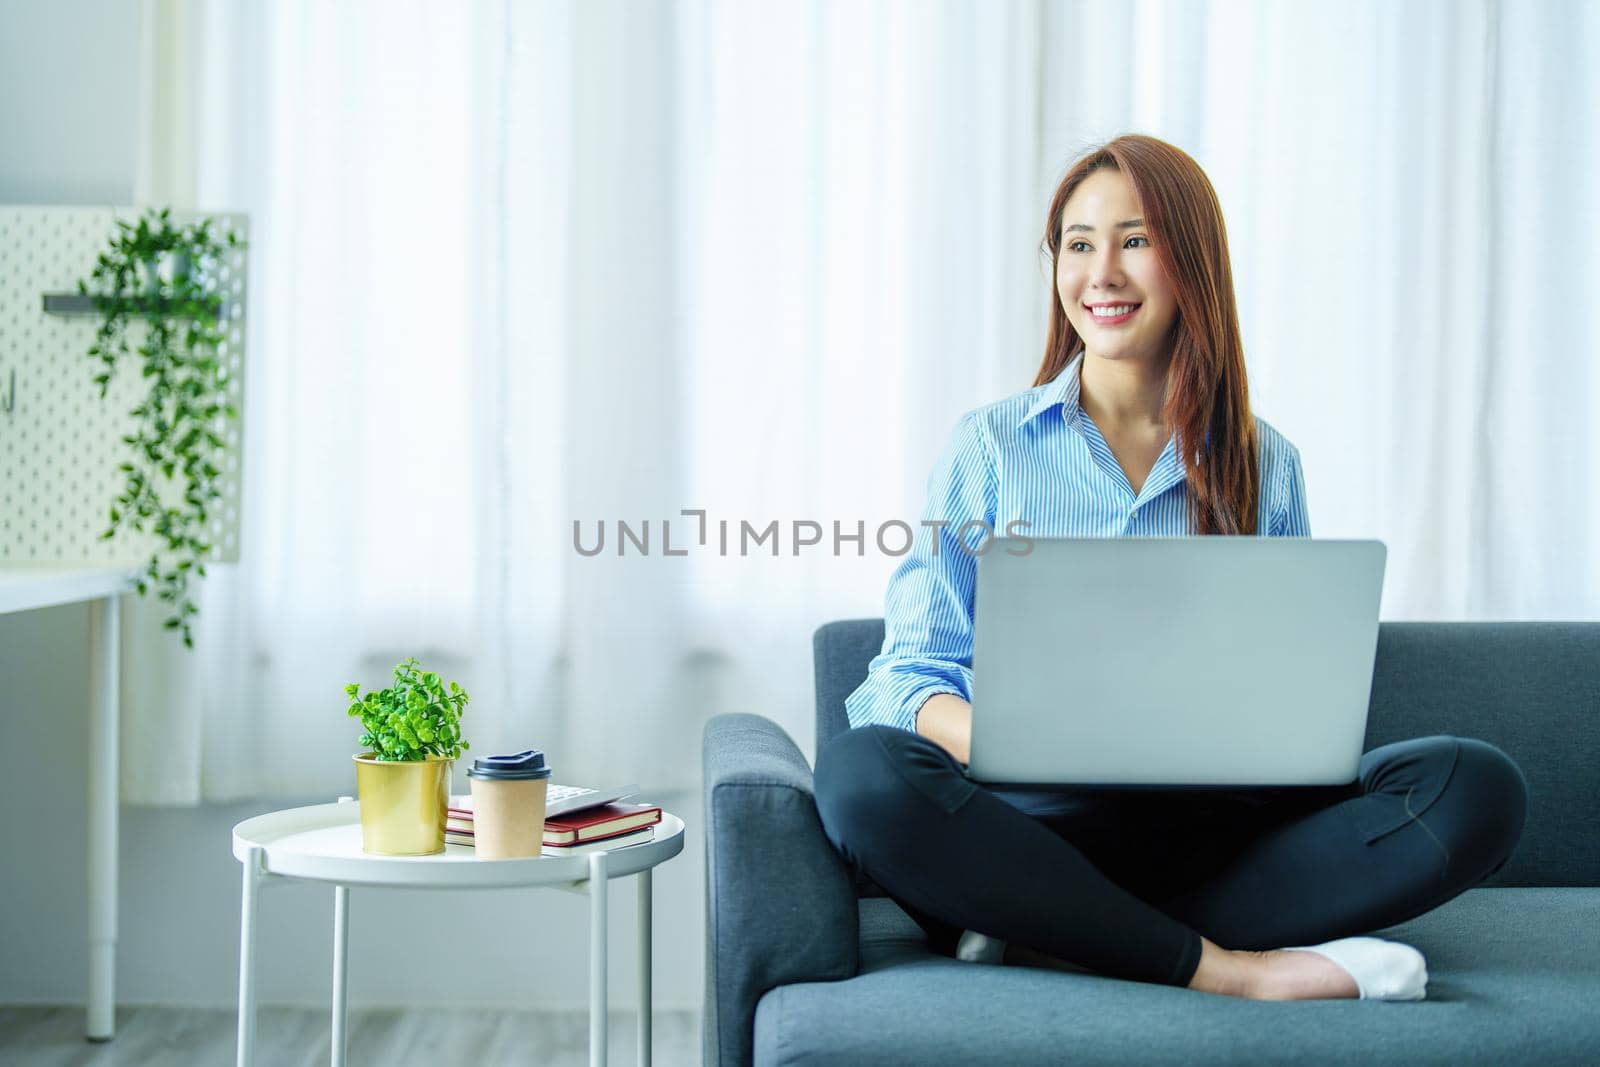 internet learning, online shopping, selling, meeting, information searching, Portrait of young Asian woman showing smiling face while using tablet to work at home. by Manastrong